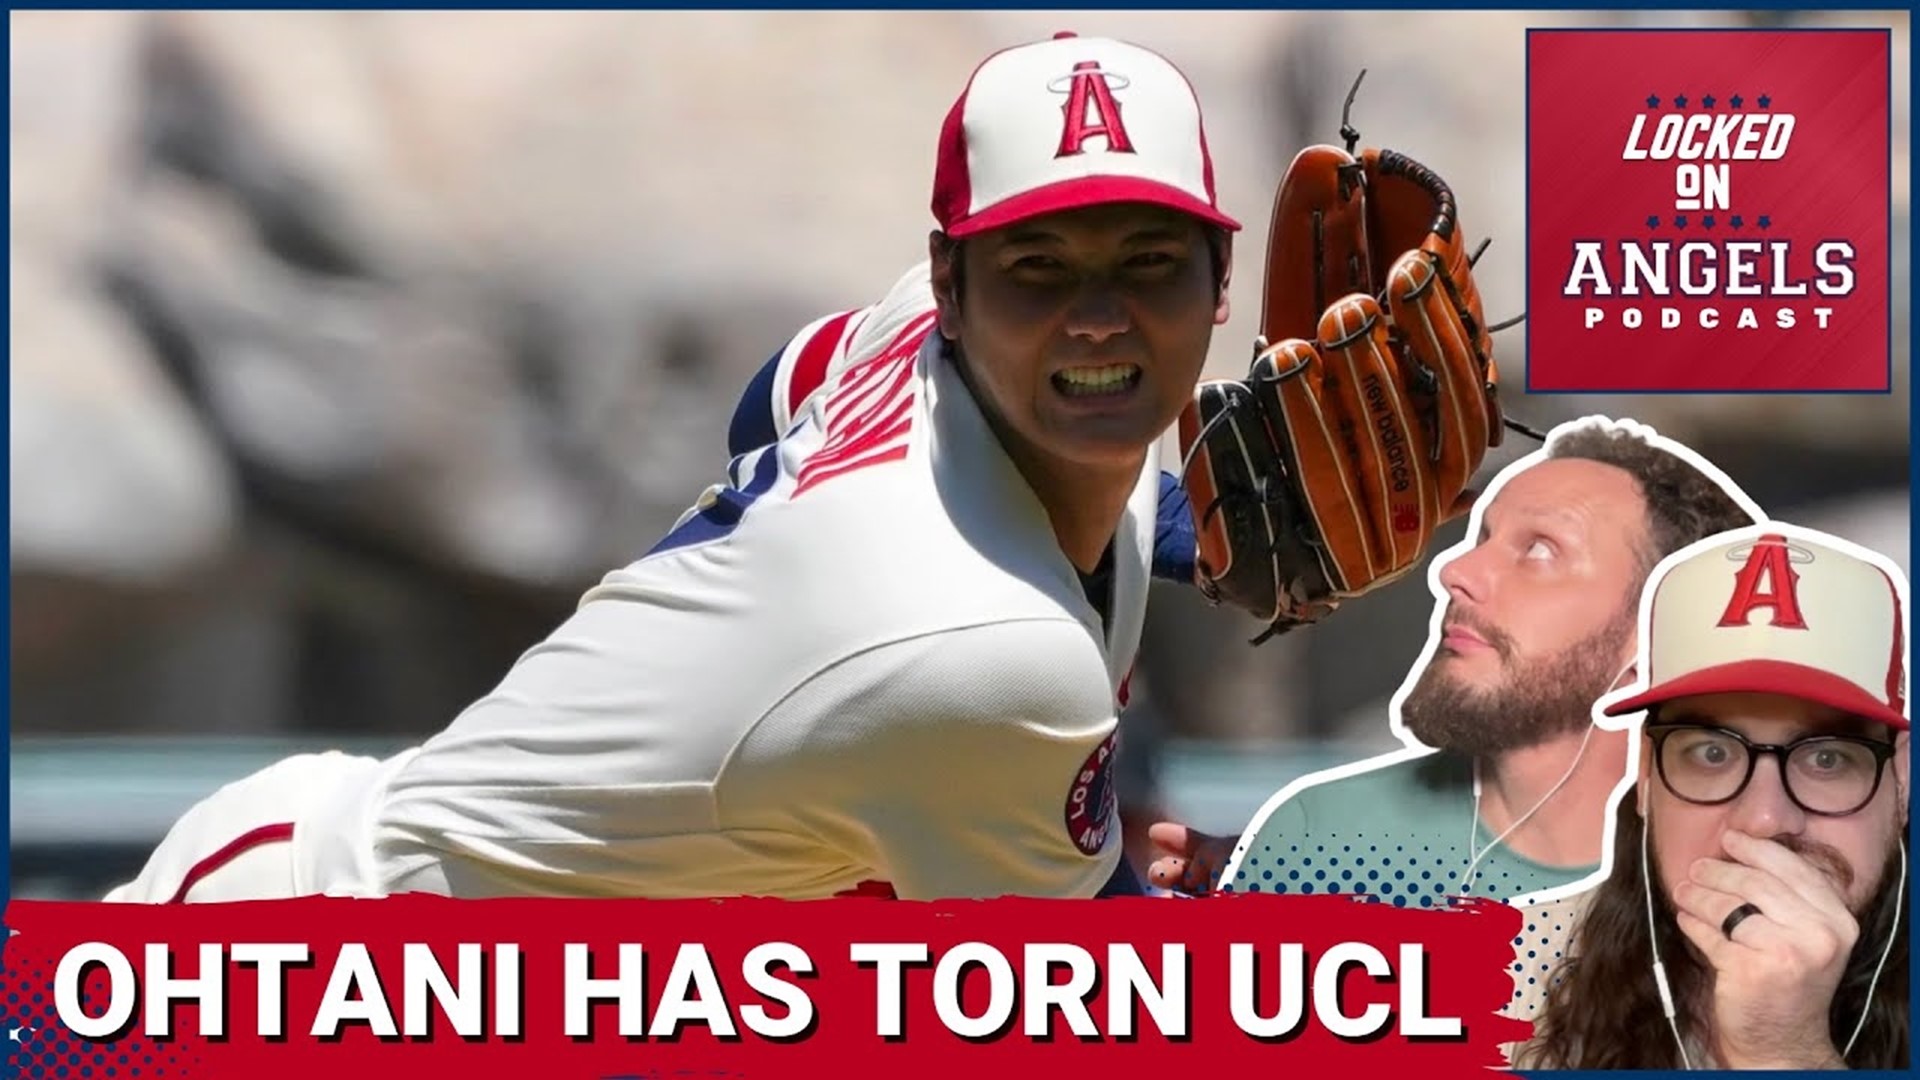 Shohei Ohtani and the Los Angeles Angels received som terrible news on Wednesday, when imaging revealed that Ohtani has a torn UCL